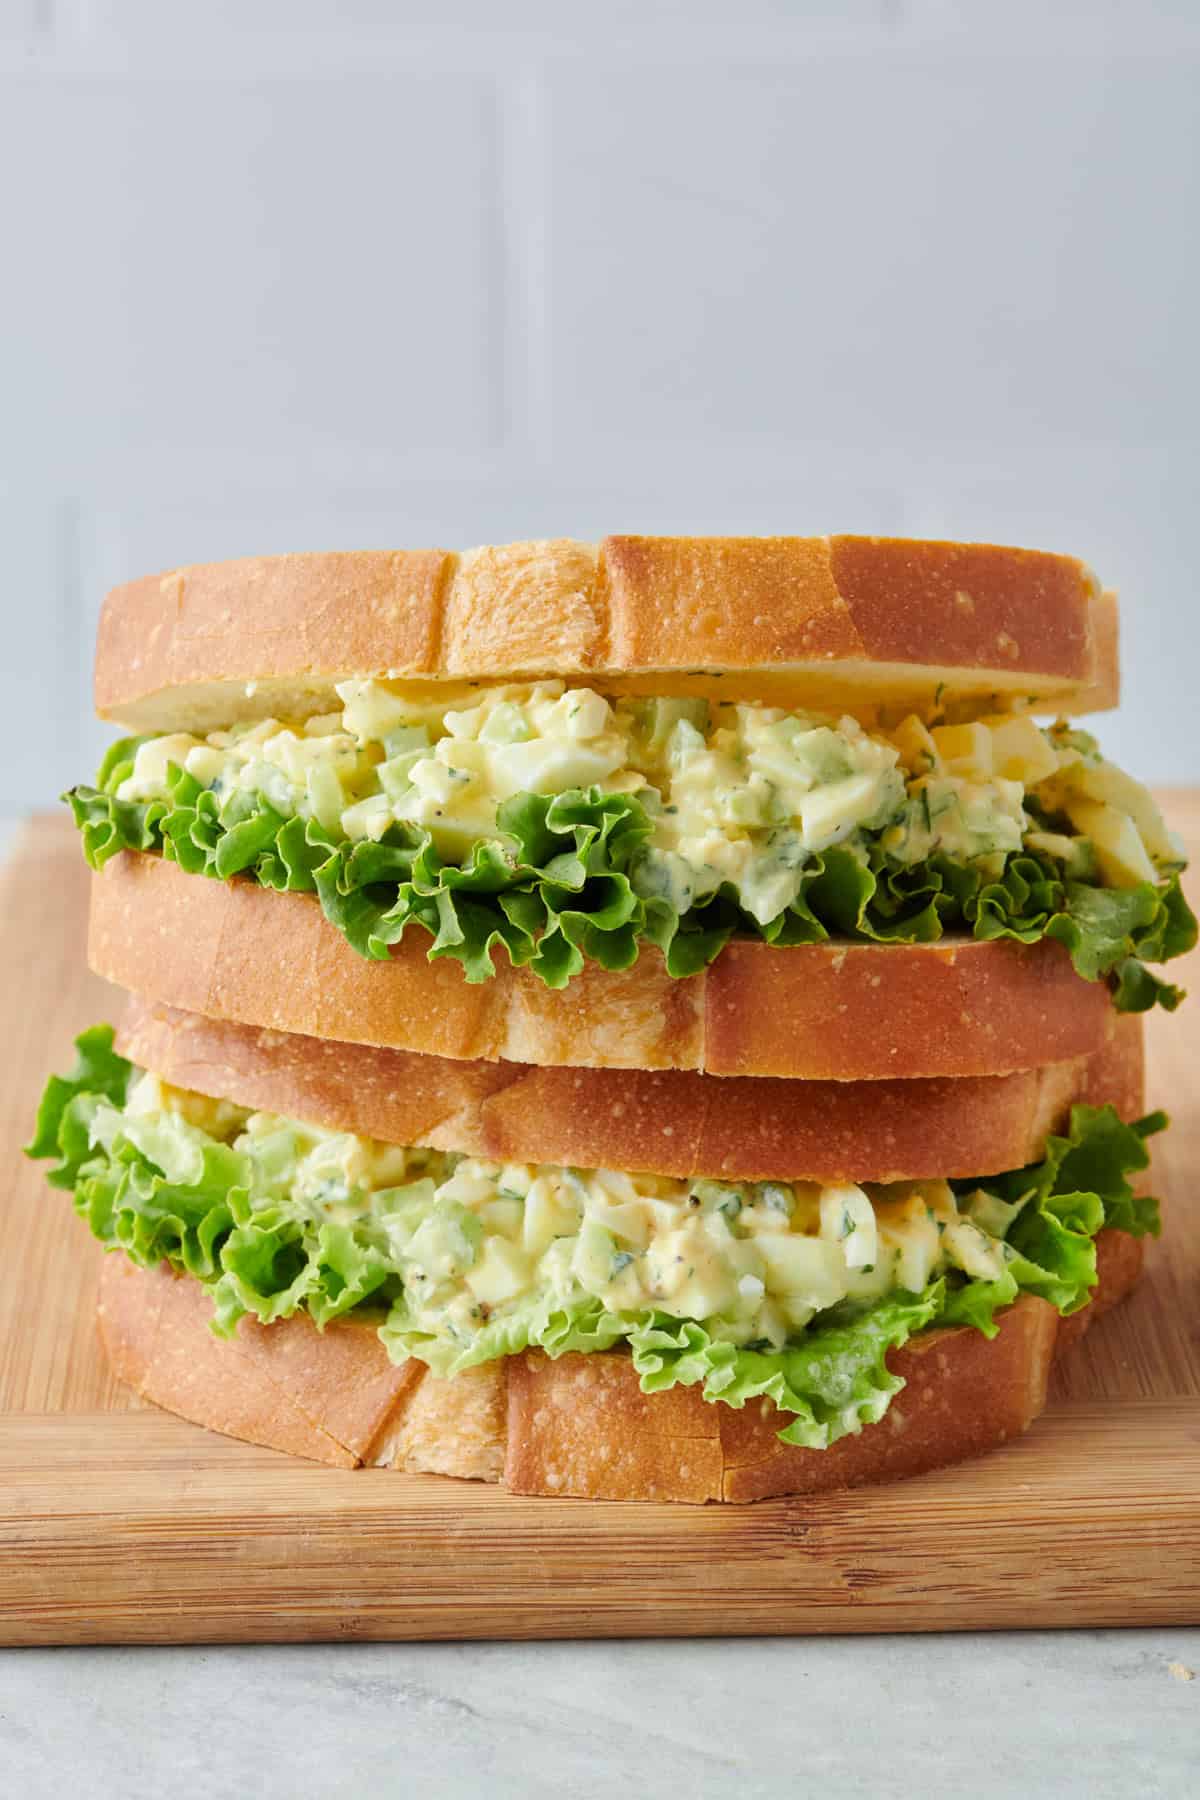 Two egg salad sandwiches stacked on top of each other.